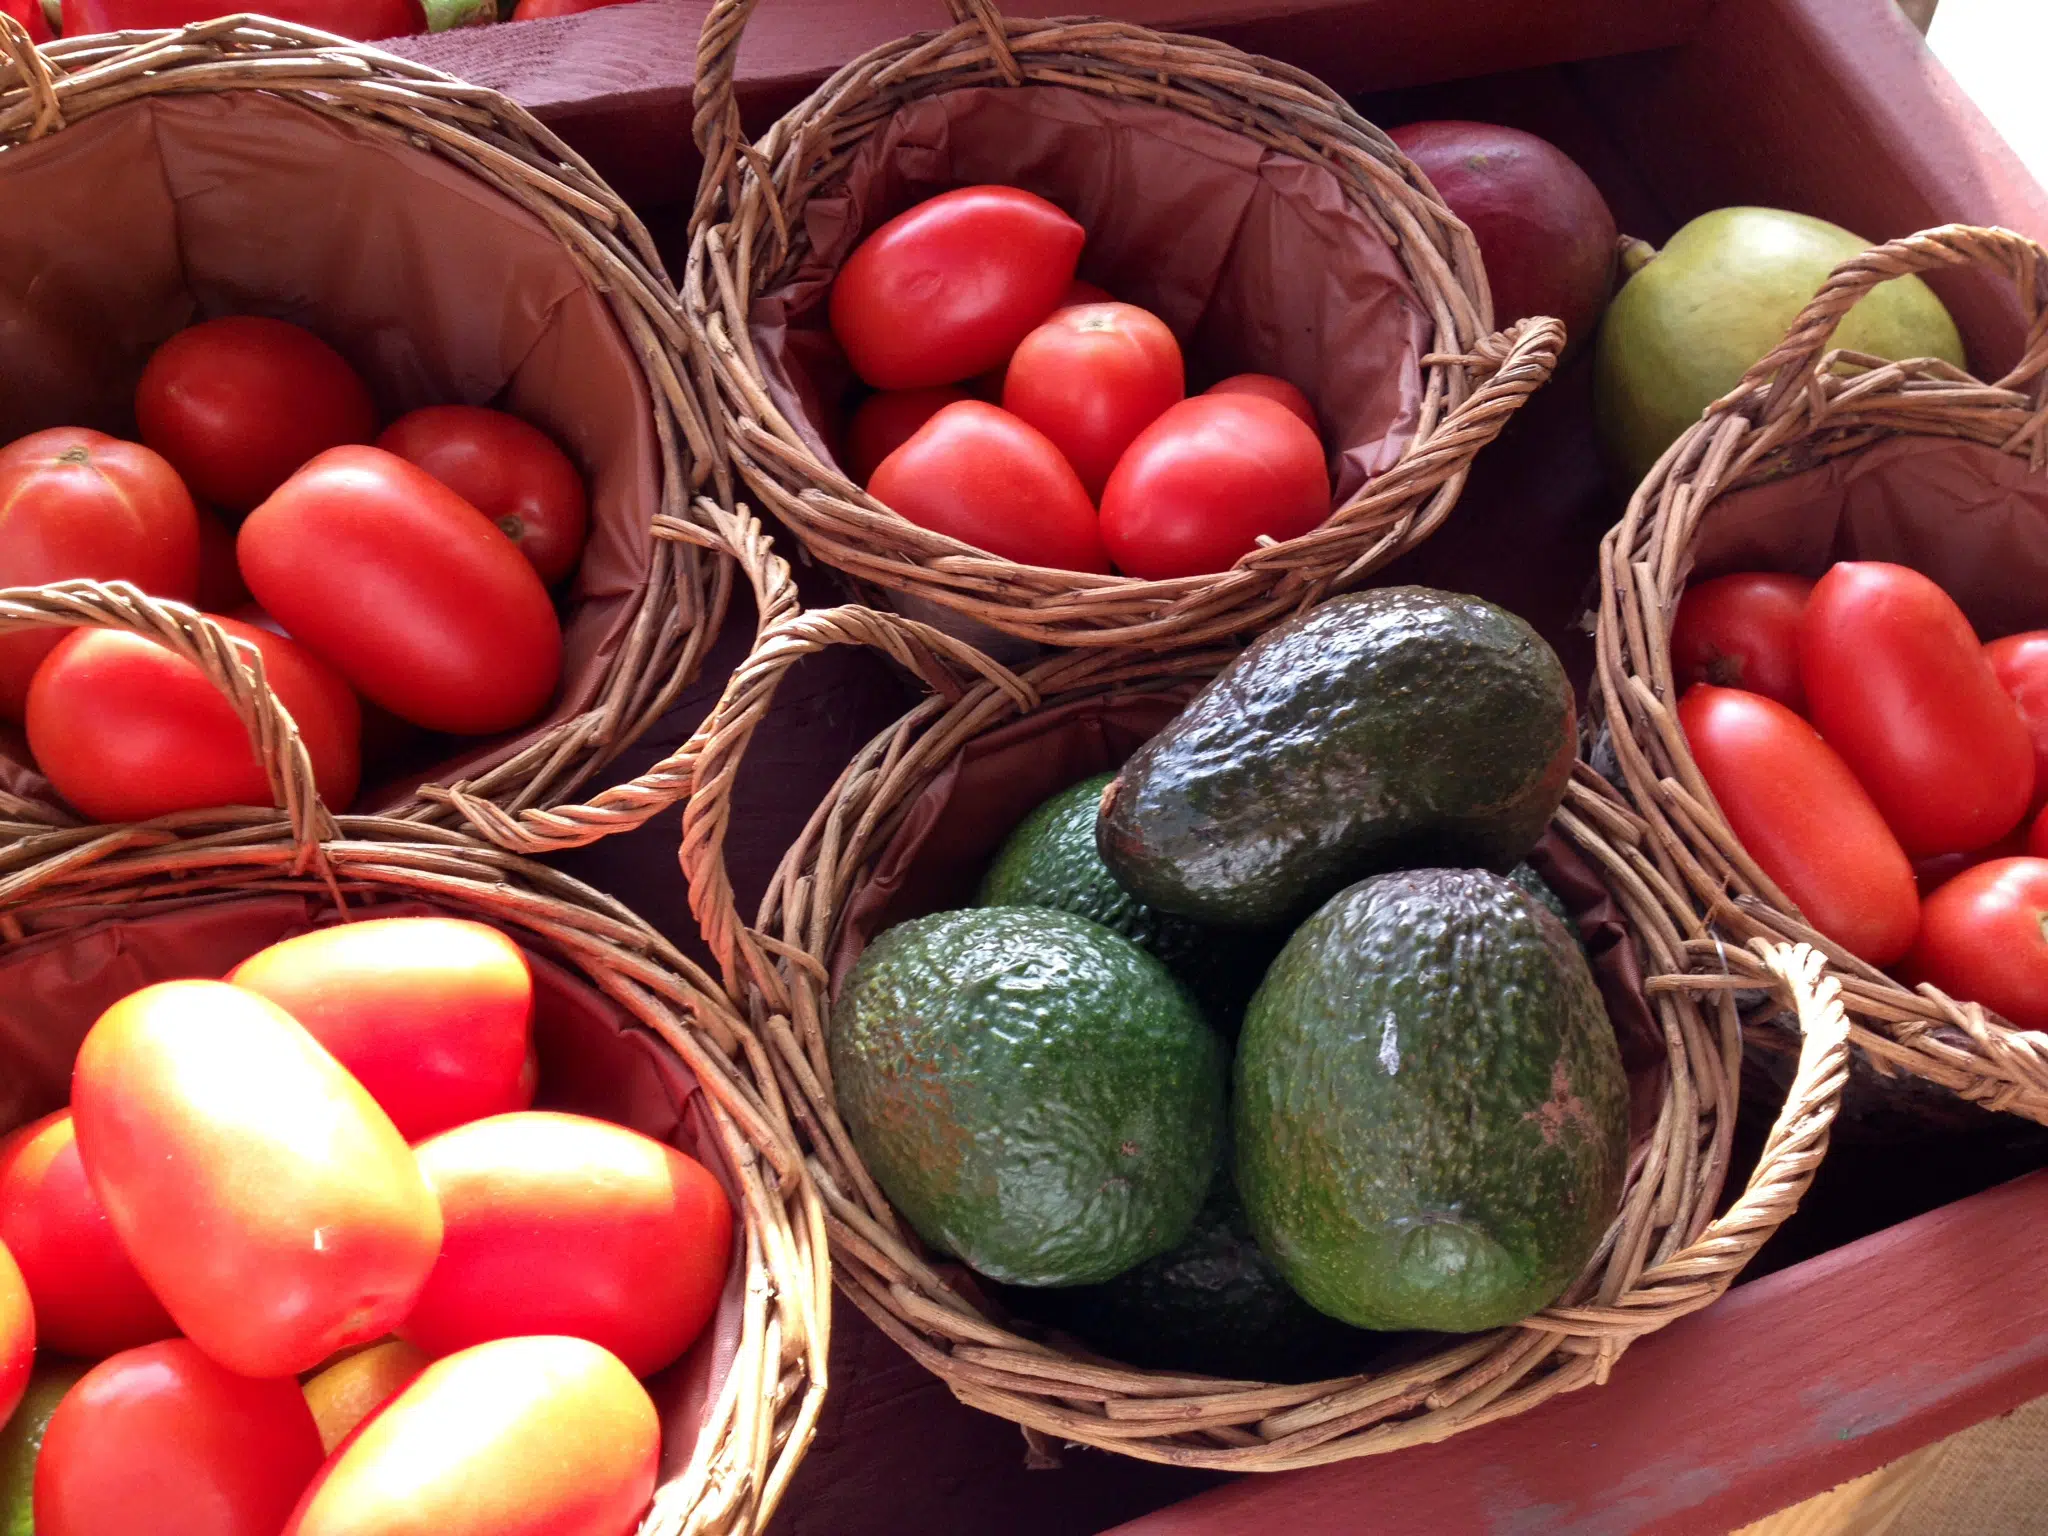 avocados and tomatoes in baskets